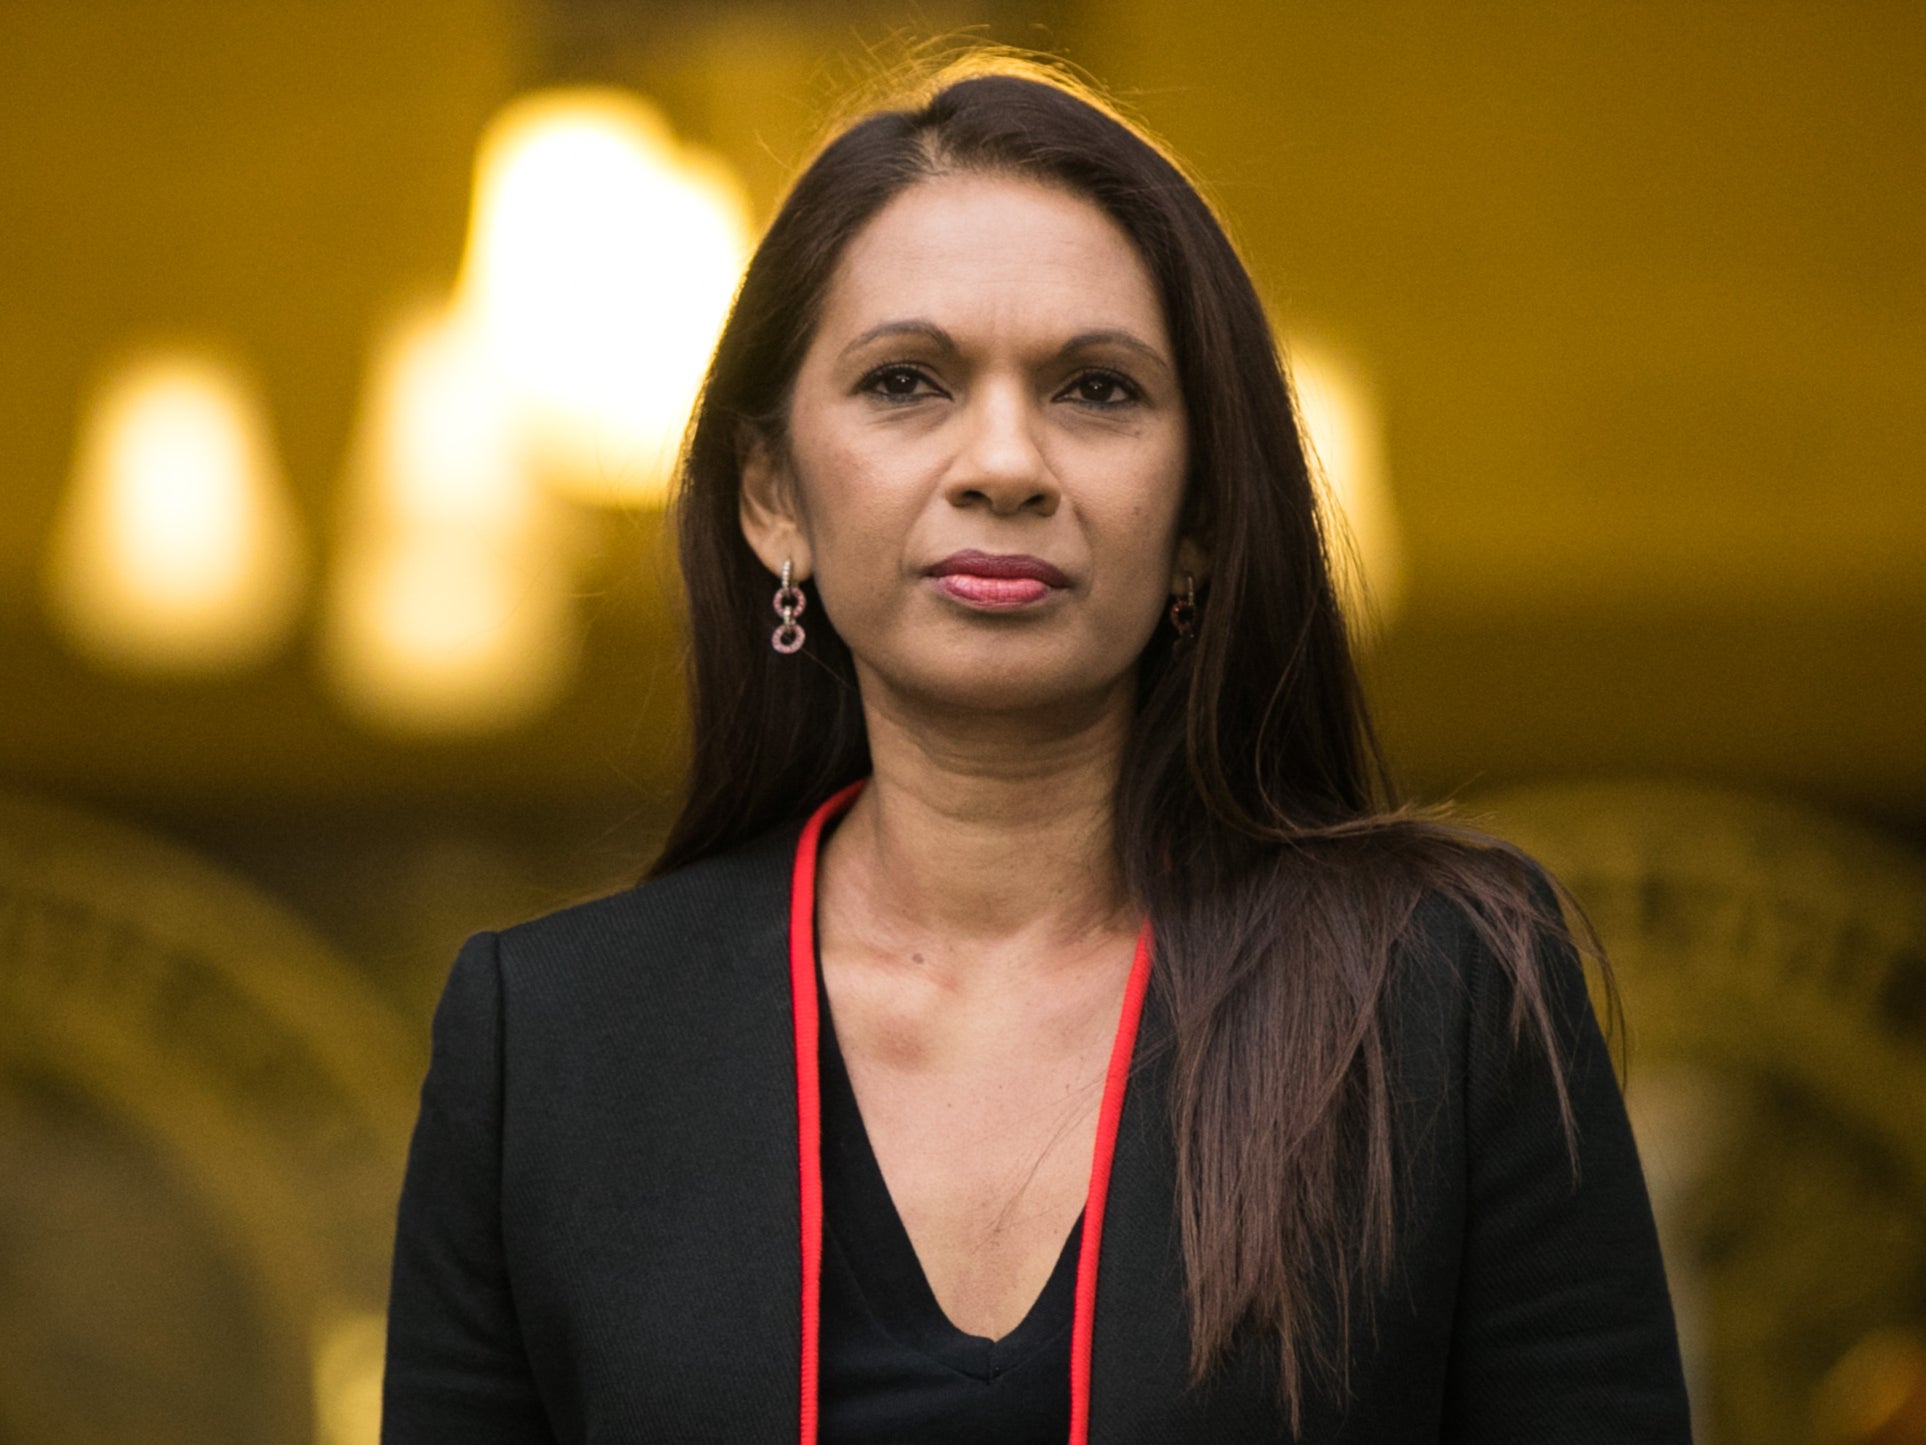 Gina Miller said it is ‘nearly impossible for small political parties to access banking in the UK’